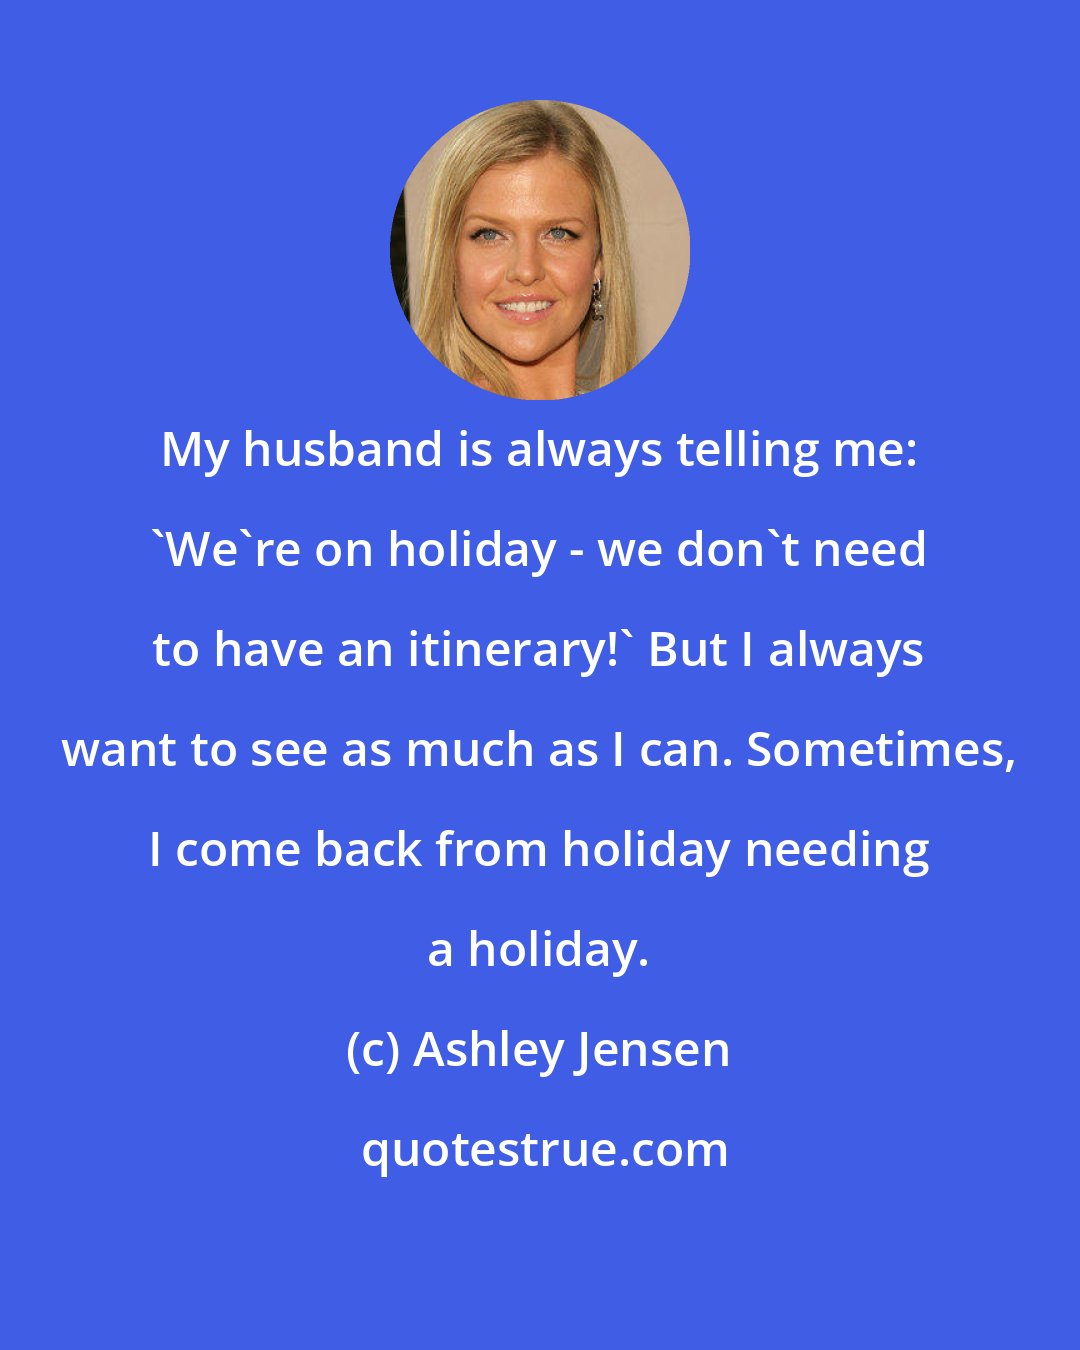 Ashley Jensen: My husband is always telling me: 'We're on holiday - we don't need to have an itinerary!' But I always want to see as much as I can. Sometimes, I come back from holiday needing a holiday.